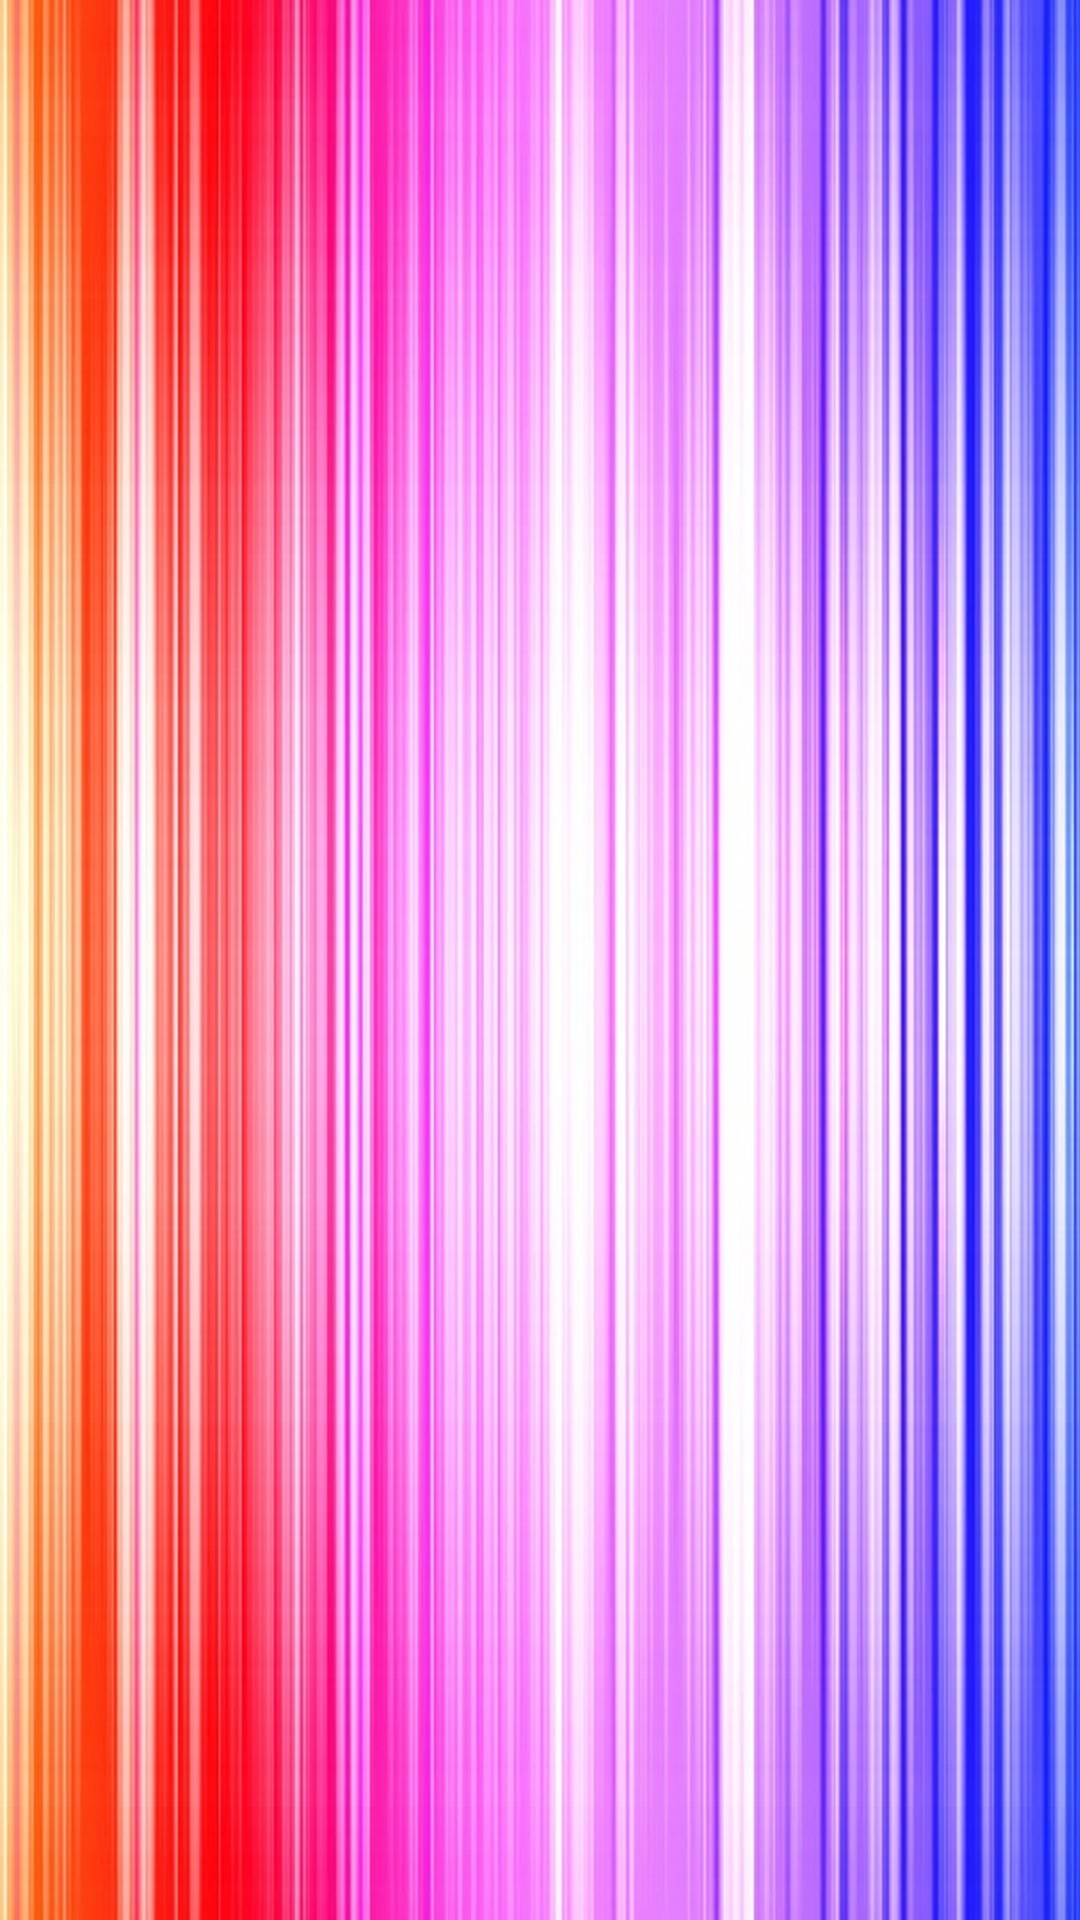 Wallpaper Rainbow Colors Android with image resolution 1080x1920 pixel. You can make this wallpaper for your Android backgrounds, Tablet, Smartphones Screensavers and Mobile Phone Lock Screen